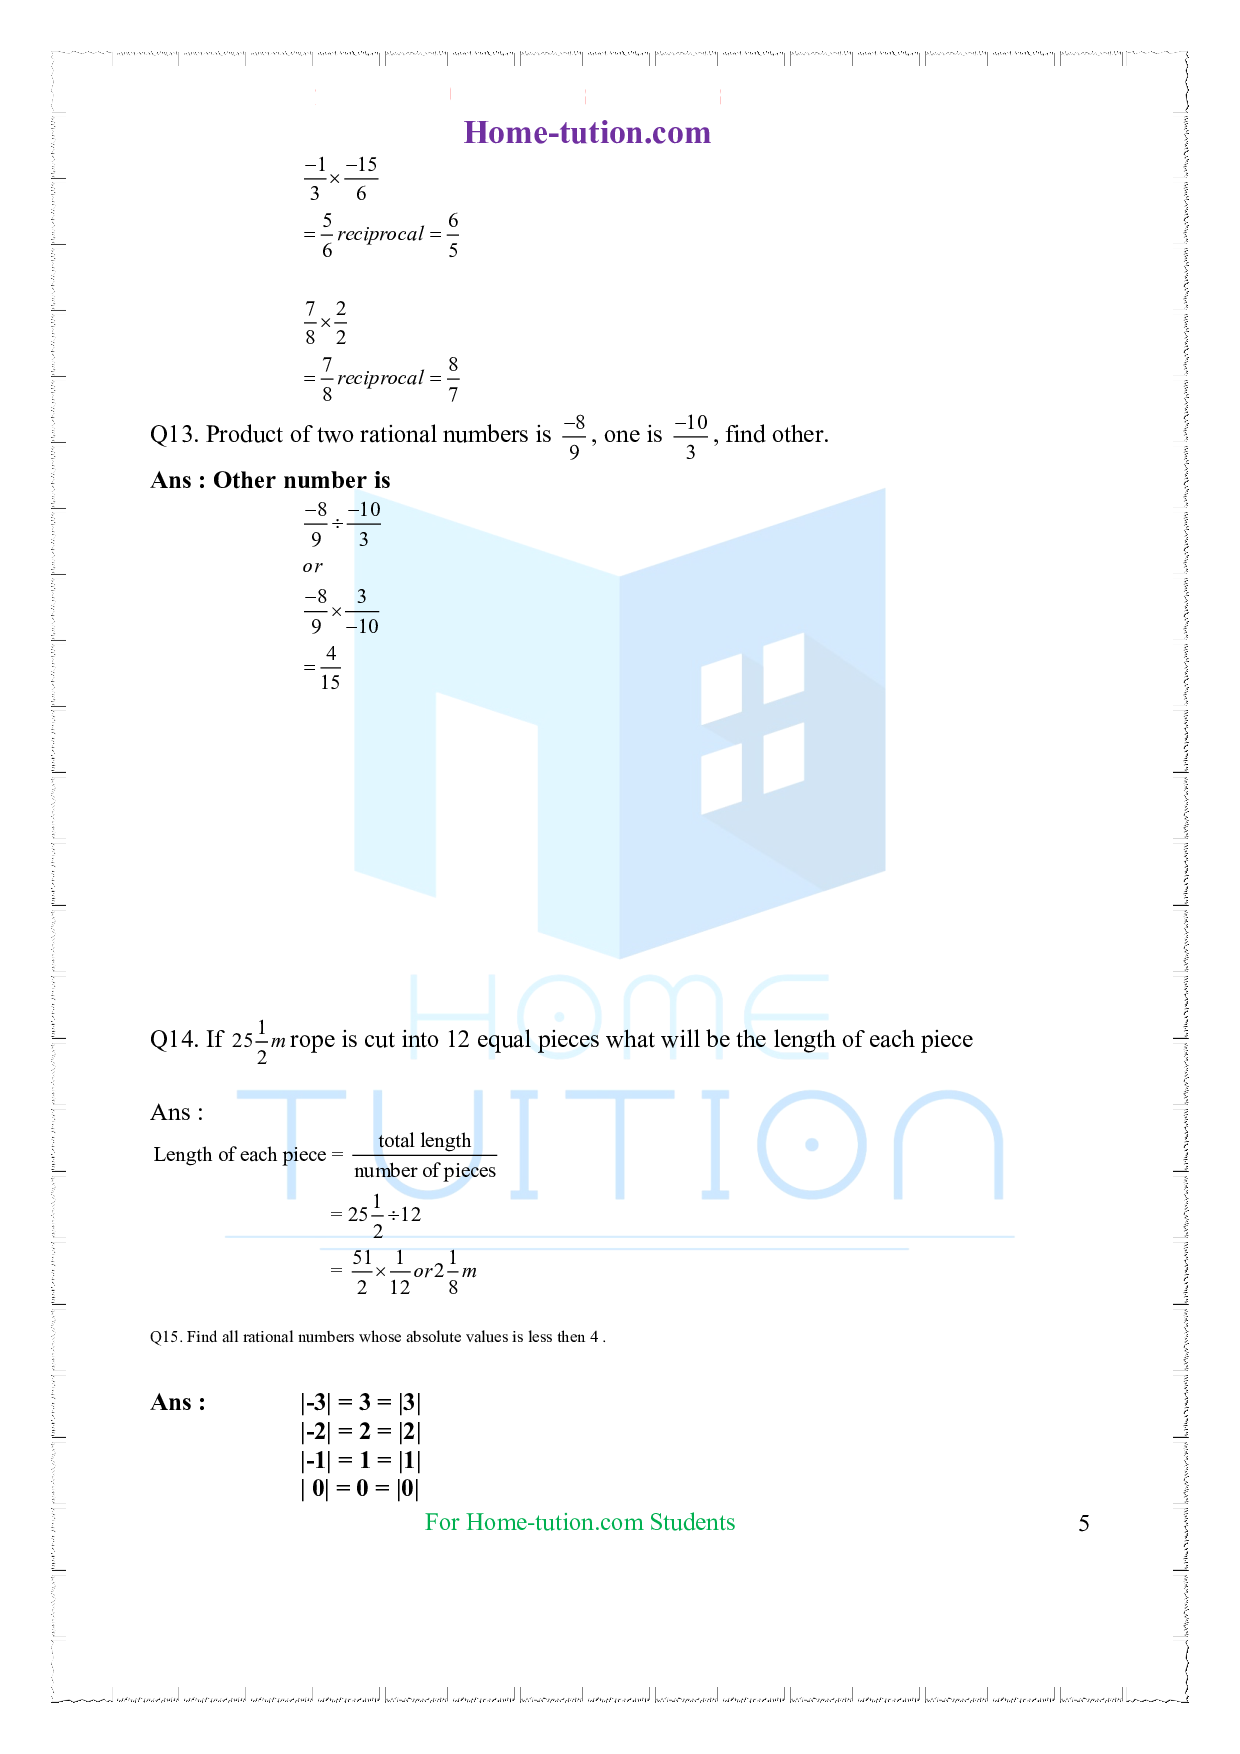 Extra Questions on Class 7 Maths Chapter 9 Rational Numbers